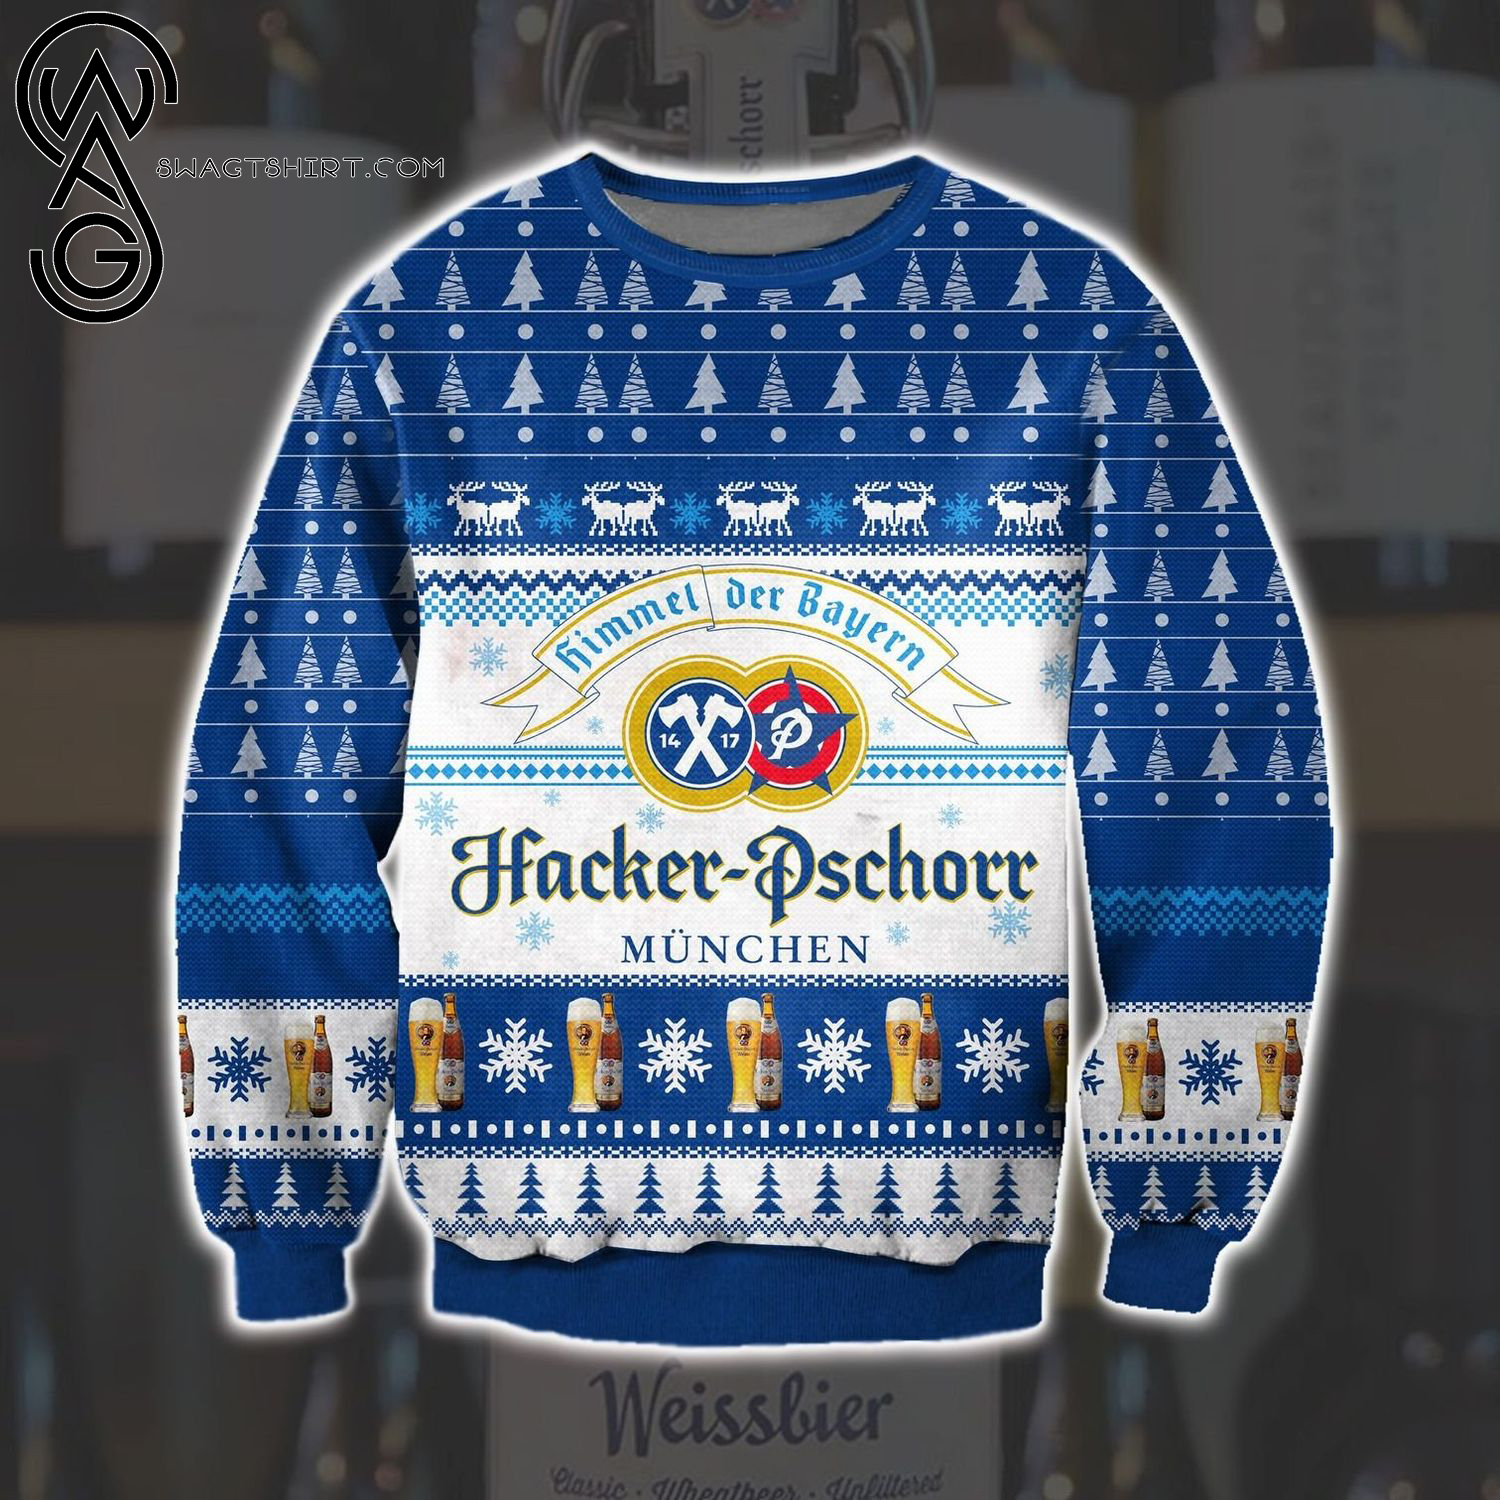 Hacker-Pschorr Brewery Full Print Ugly Christmas Sweater